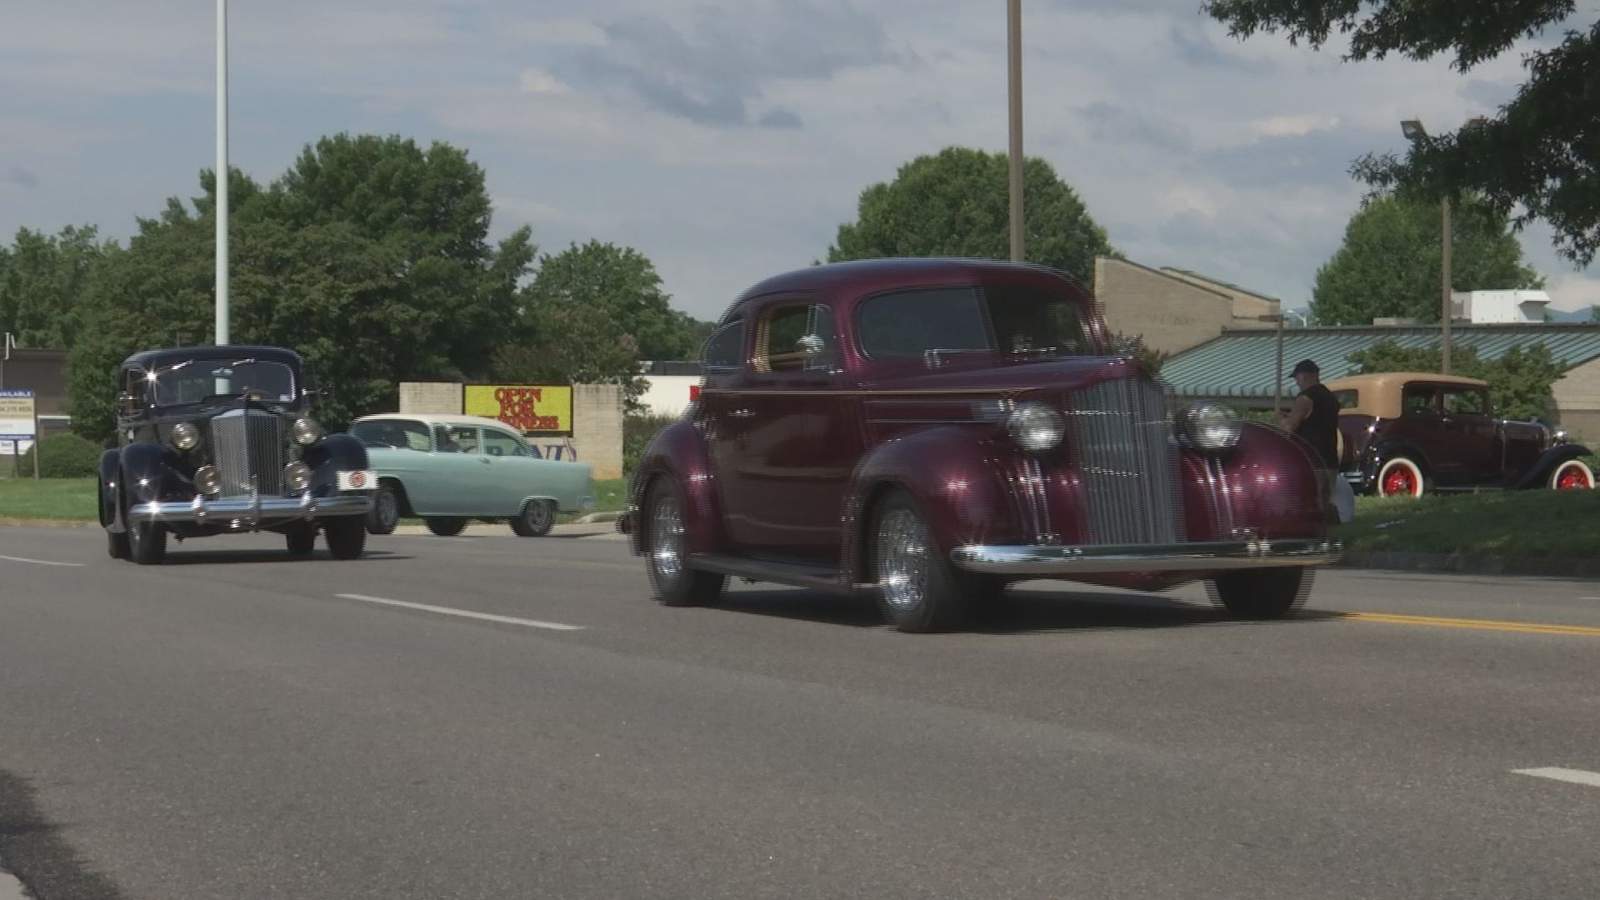 Dozens of car enthusiasts take vintage vehicles for a cruise